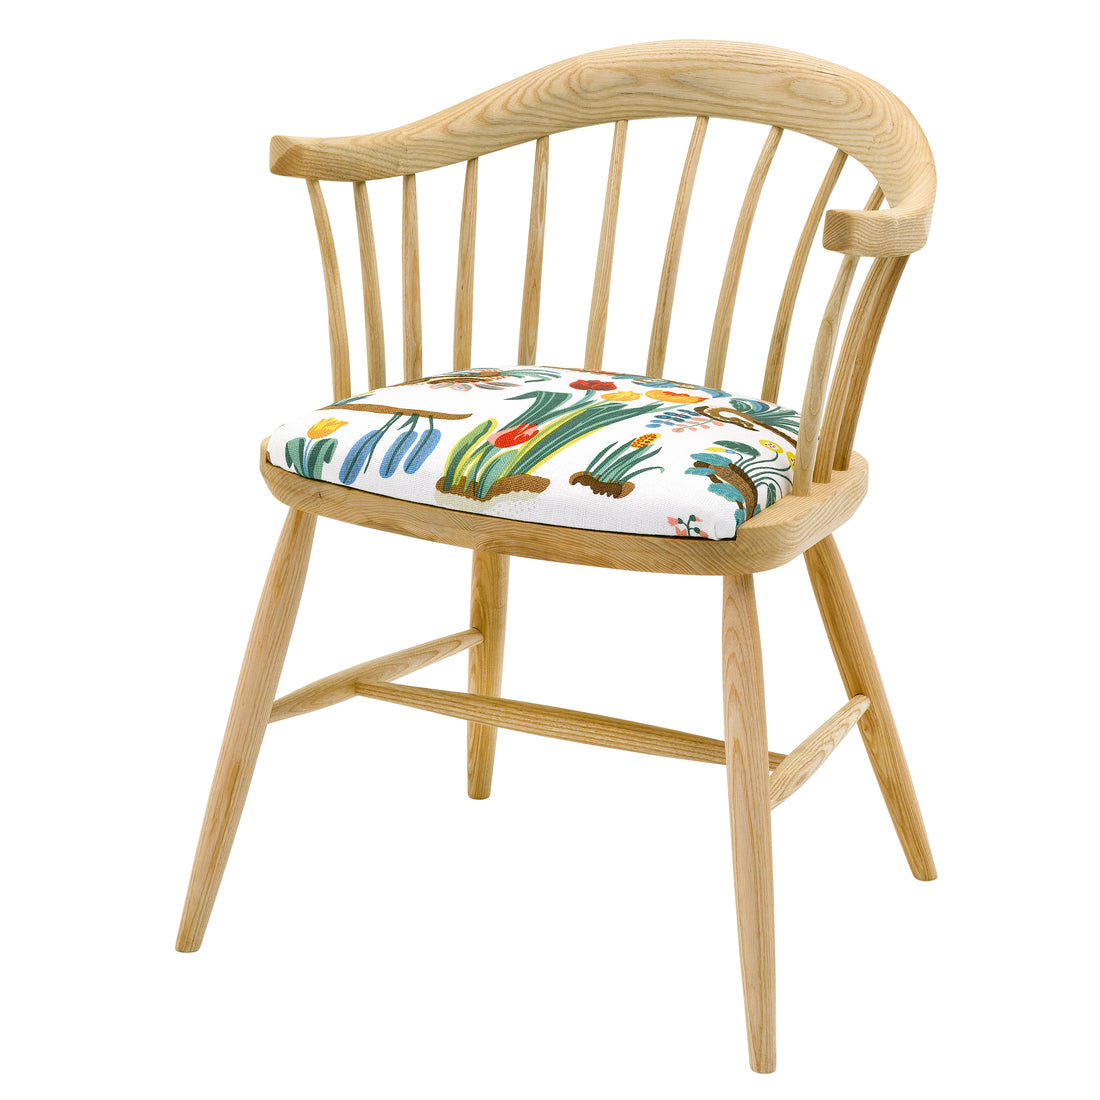 Our Darwin Modern Windsor Chairs and Why We Love Them